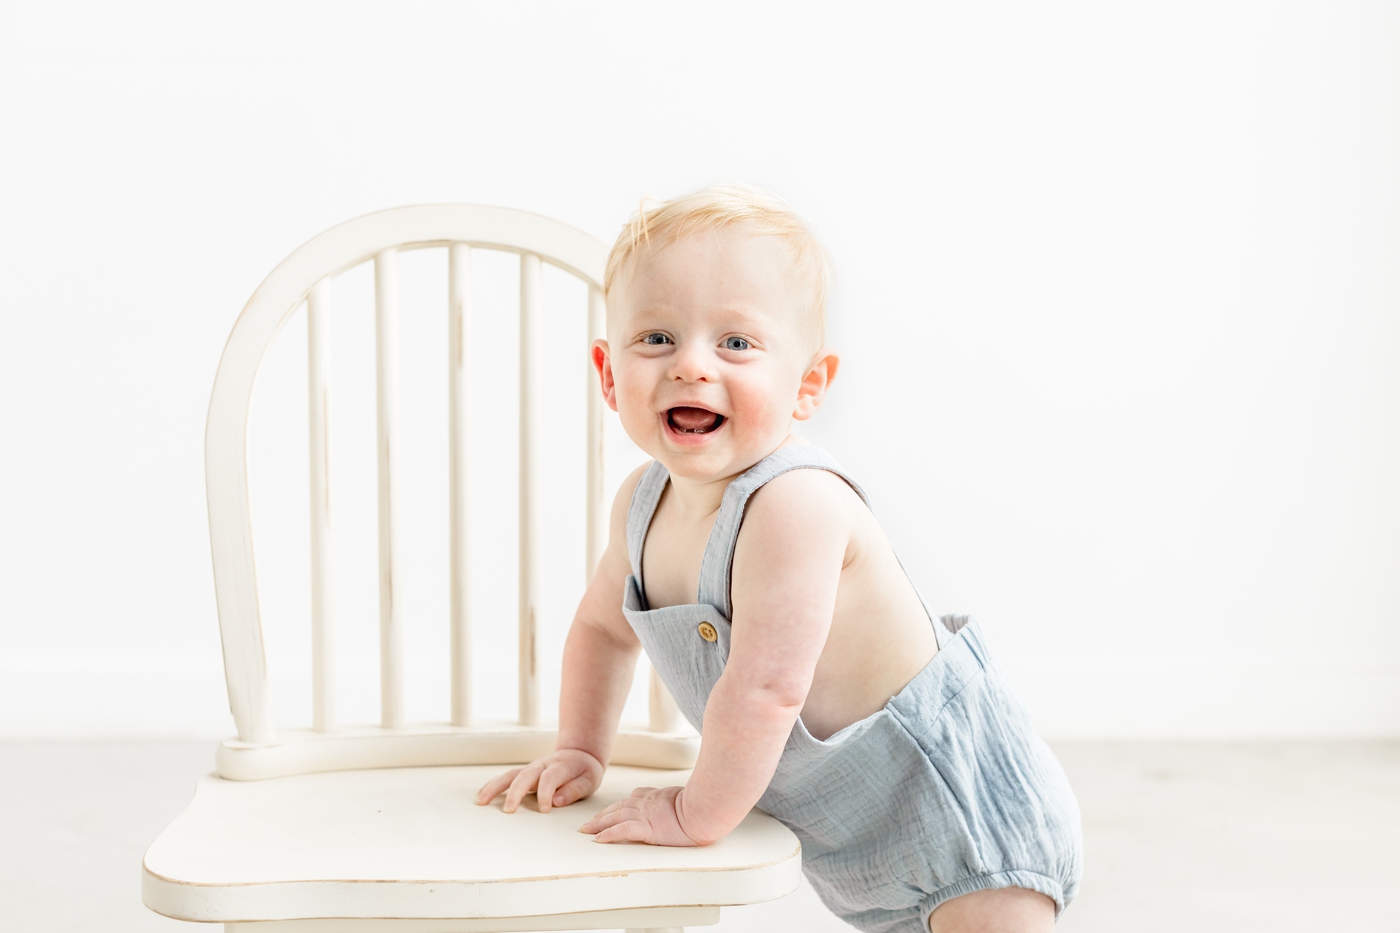 Little boy smiling at camera while leaning on white chair. Photo by Sana Ahmed Photography.